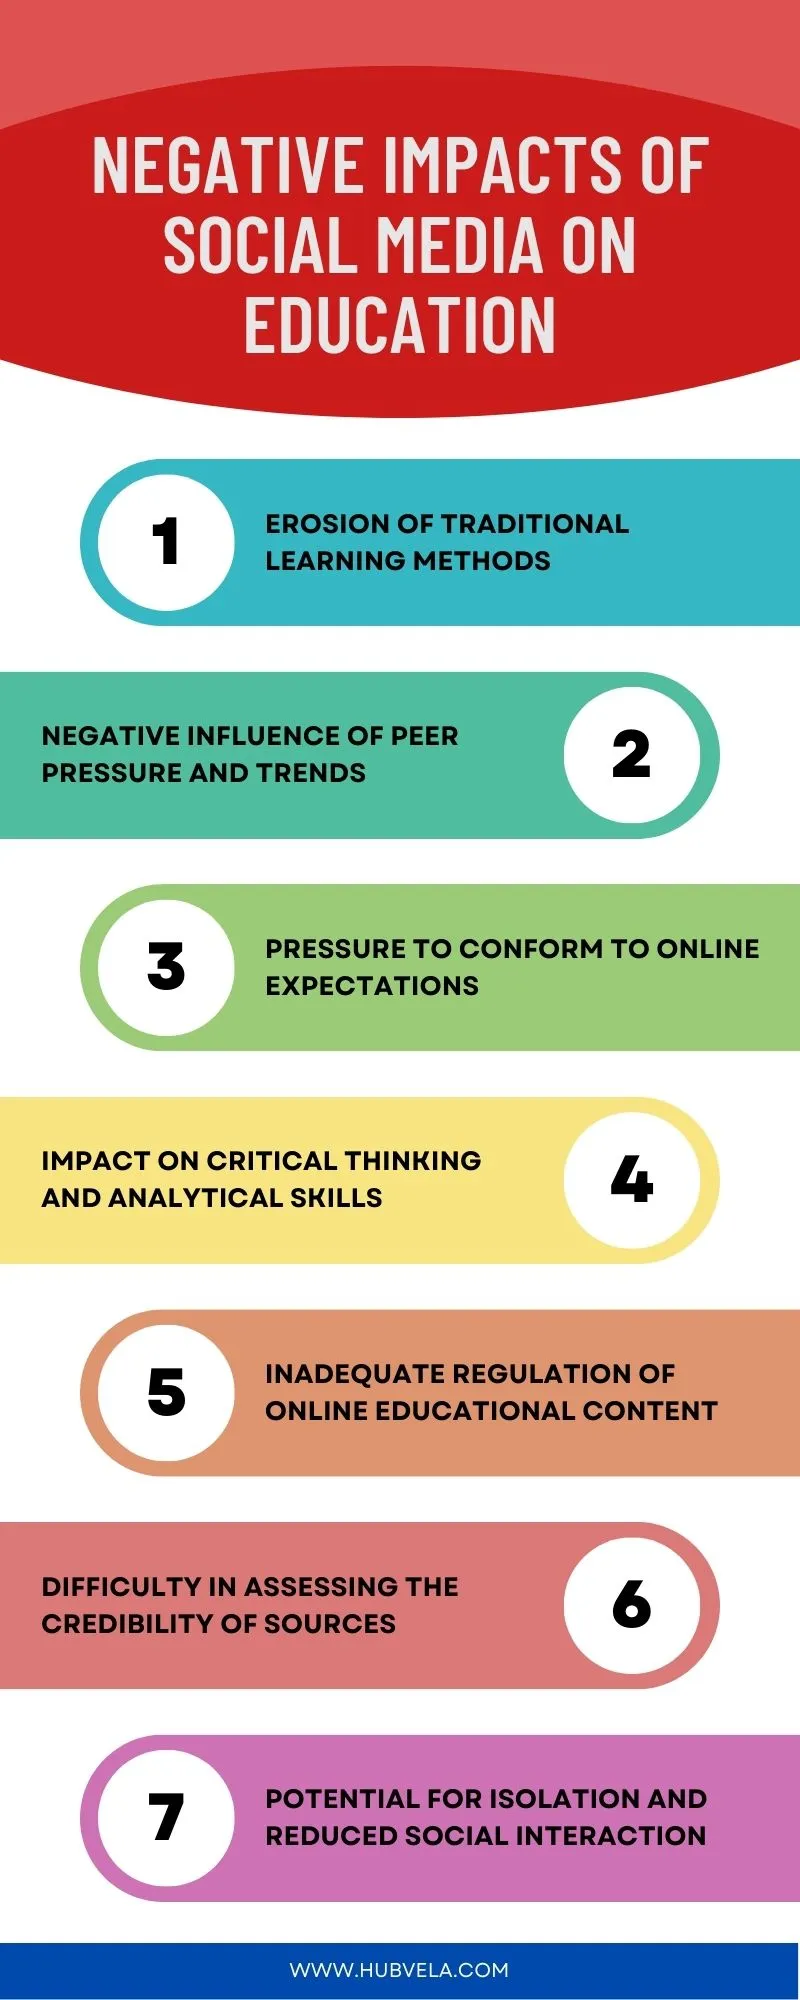 Negative Impacts of Social Media on Education Infographic